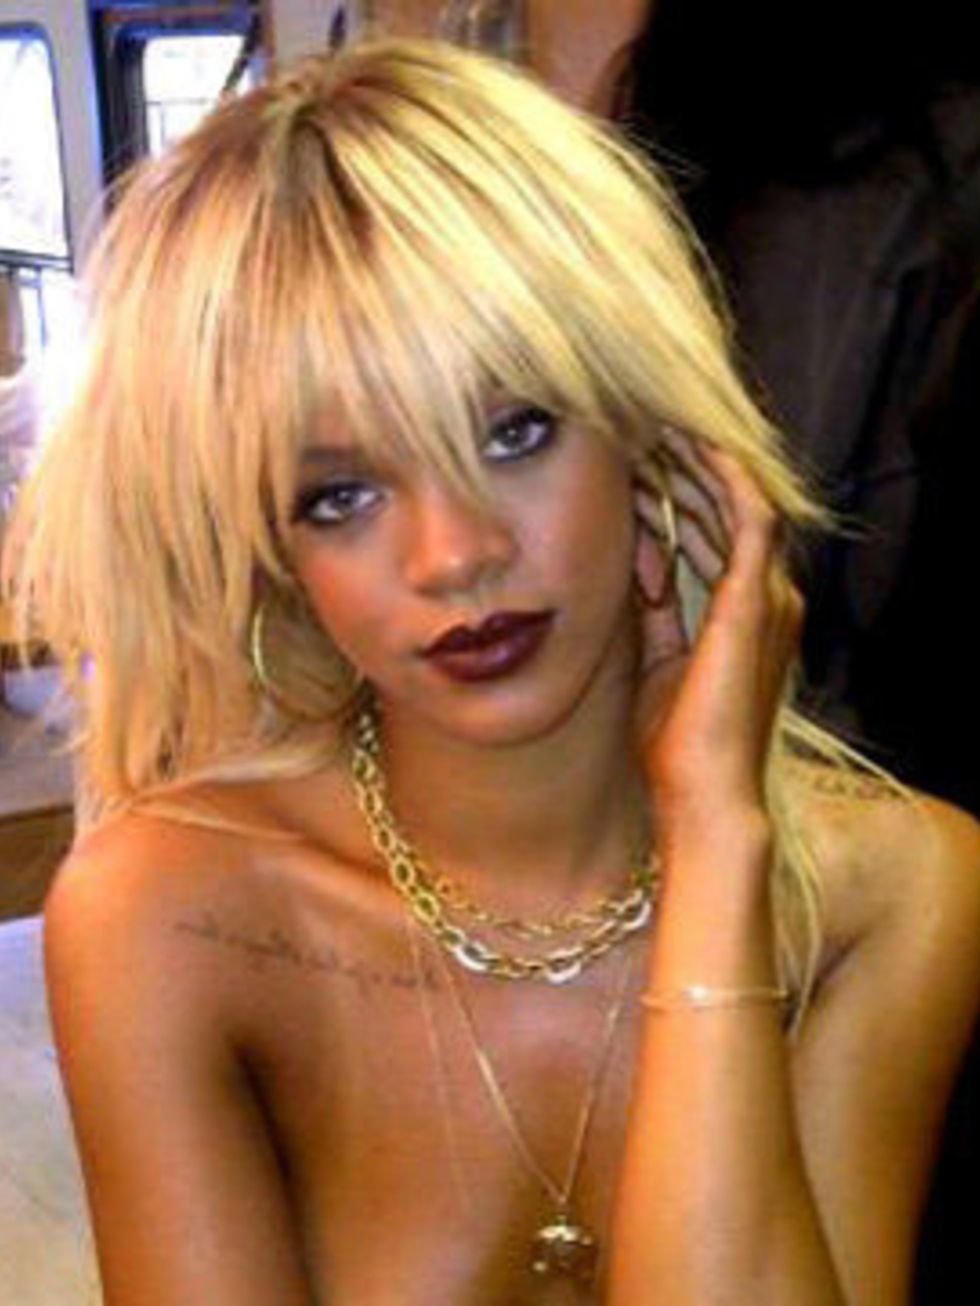 <p>The twit pic Rihanna posted of her new blonde hair on her Twitter account @rihanna</p>